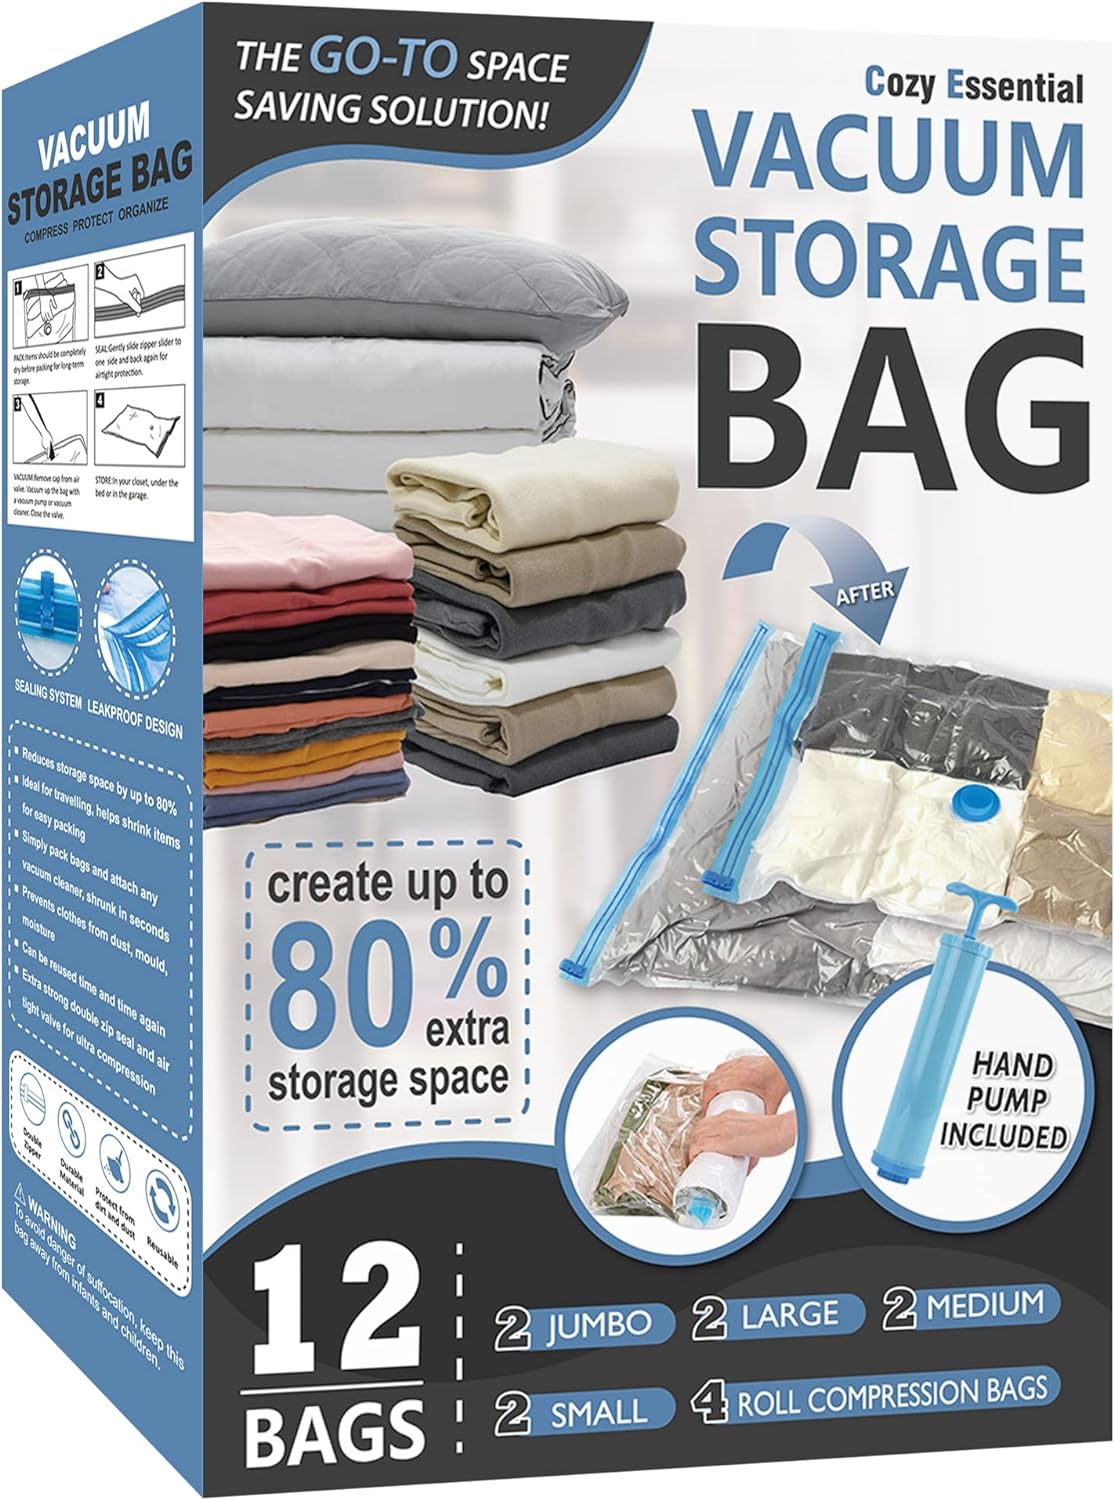 Vacuum Storage Bags, Space Saver Bags Compression Storage Bags for Comforters and Blankets, Vacuum Sealer Bags for Clothes Storage, Hand Pump Included-A